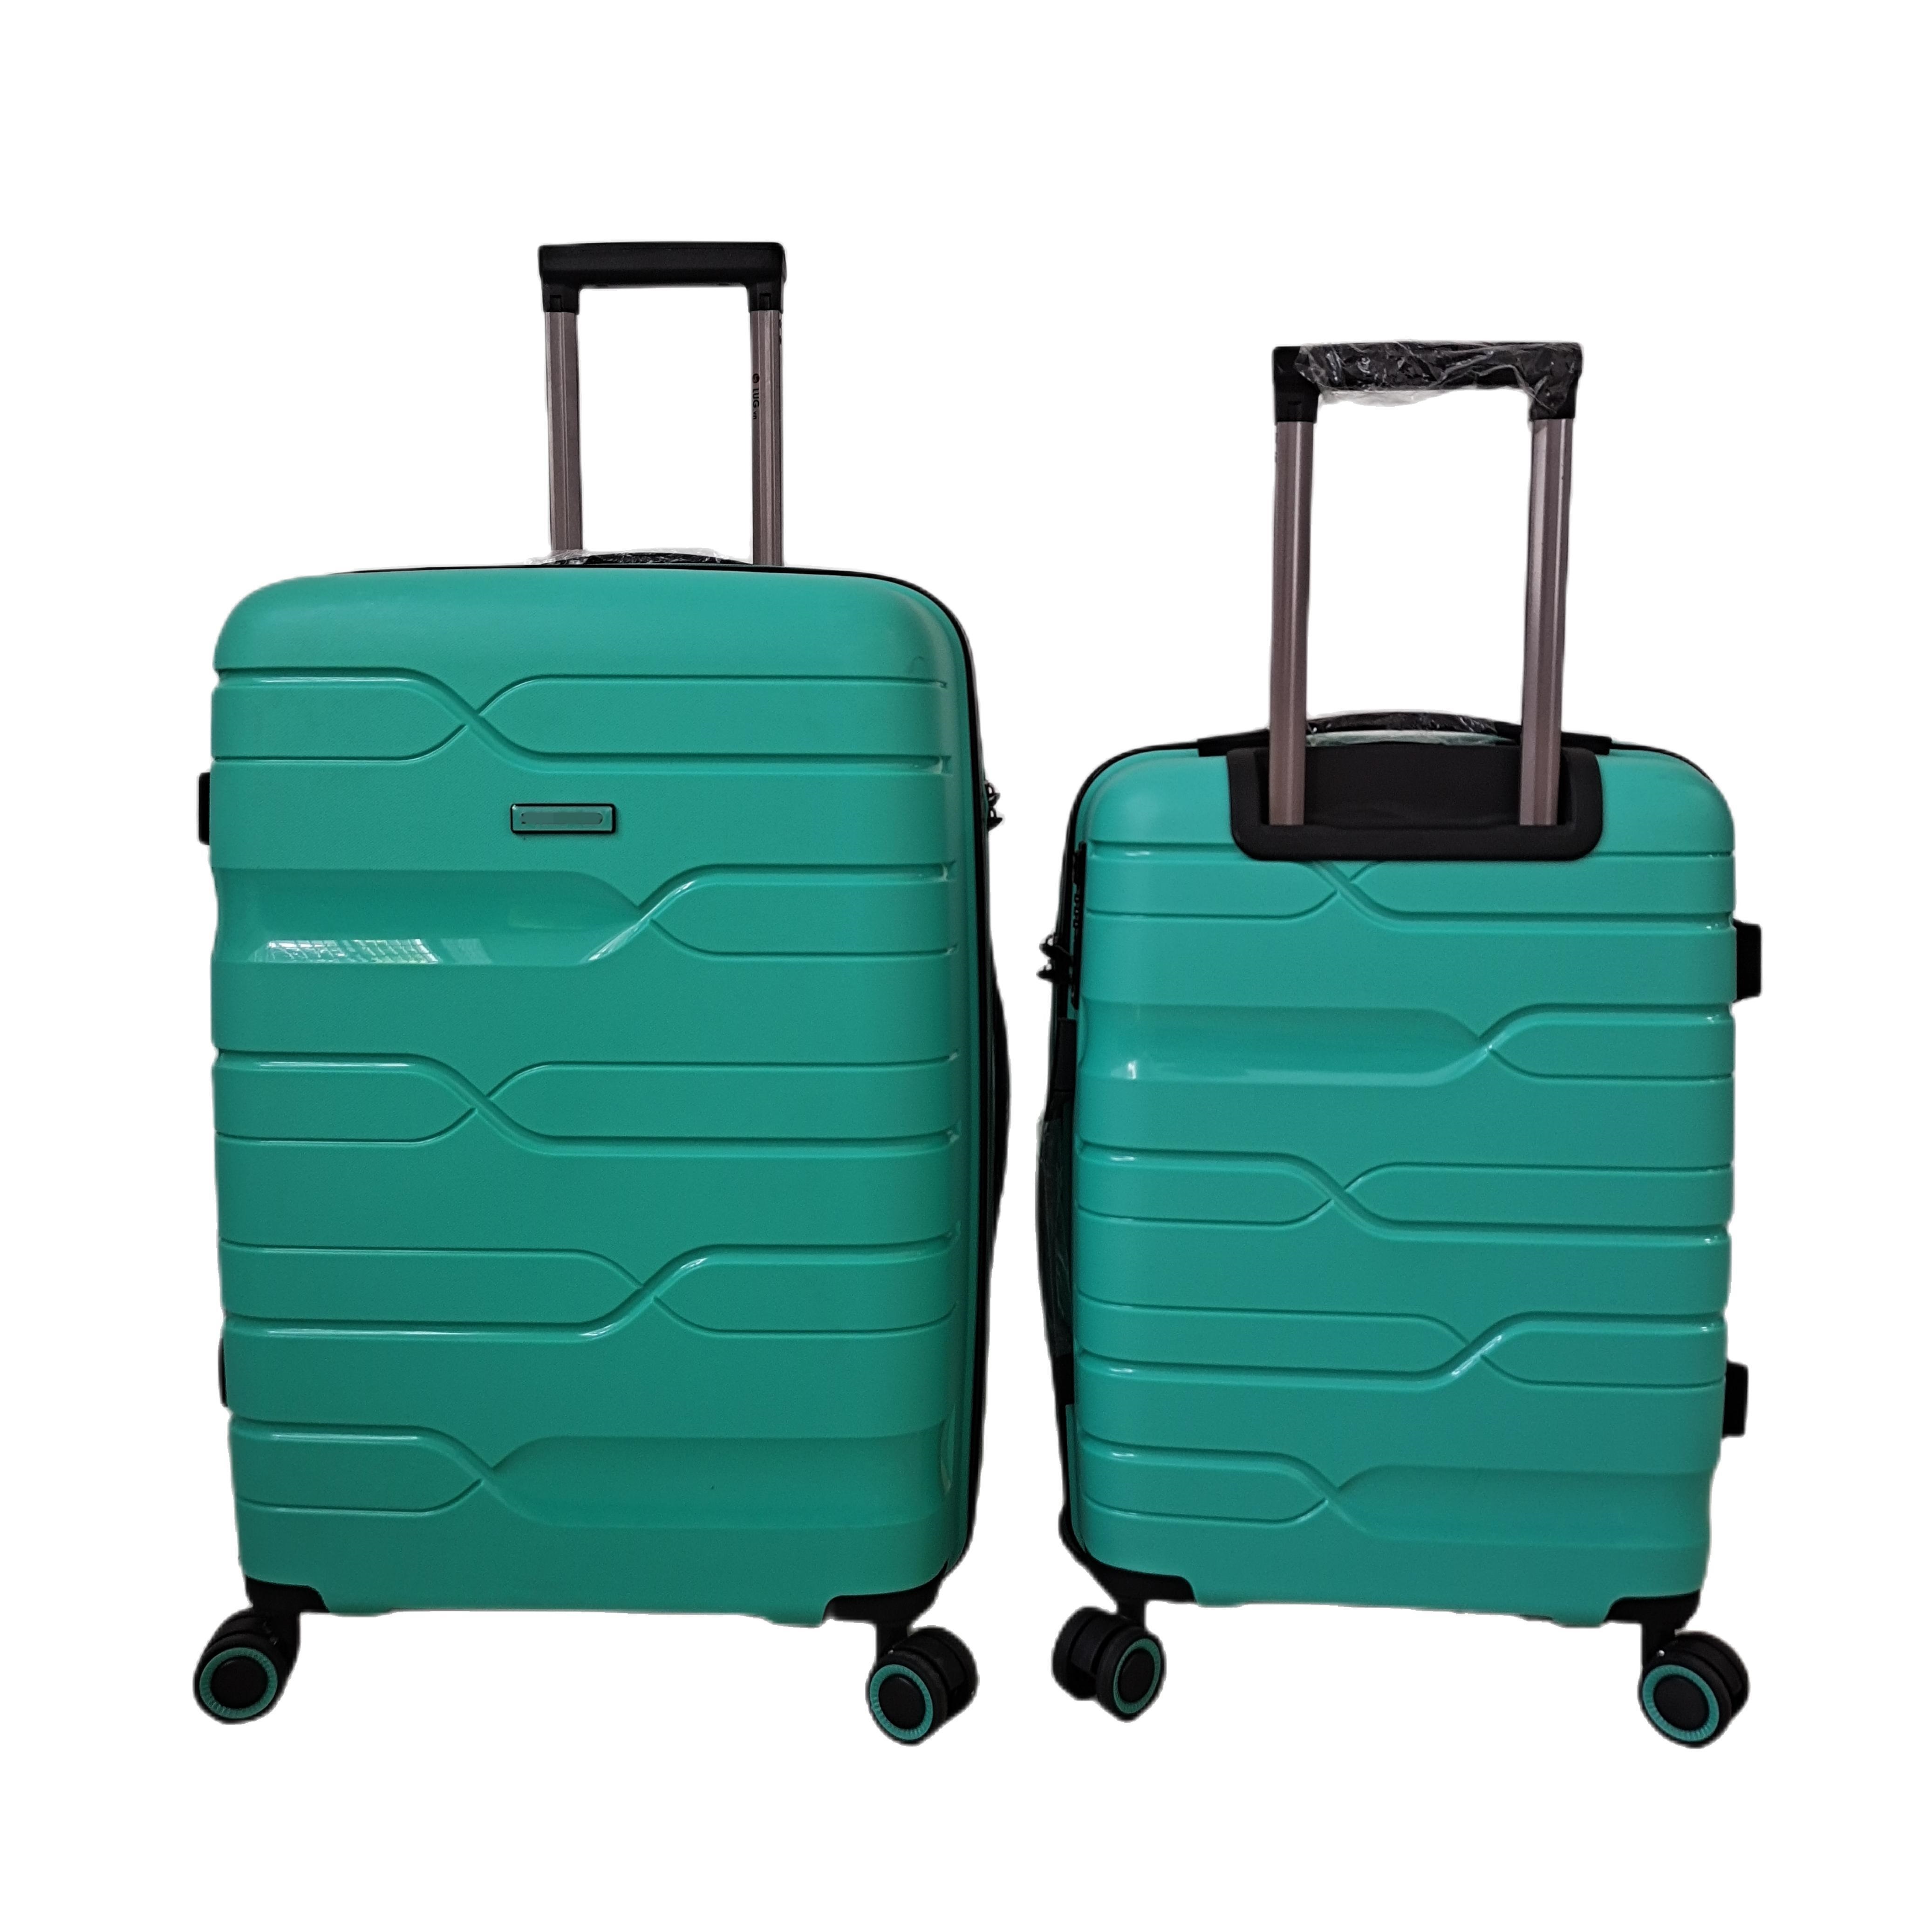 PP Trolley Suit Case Carry on Luggage